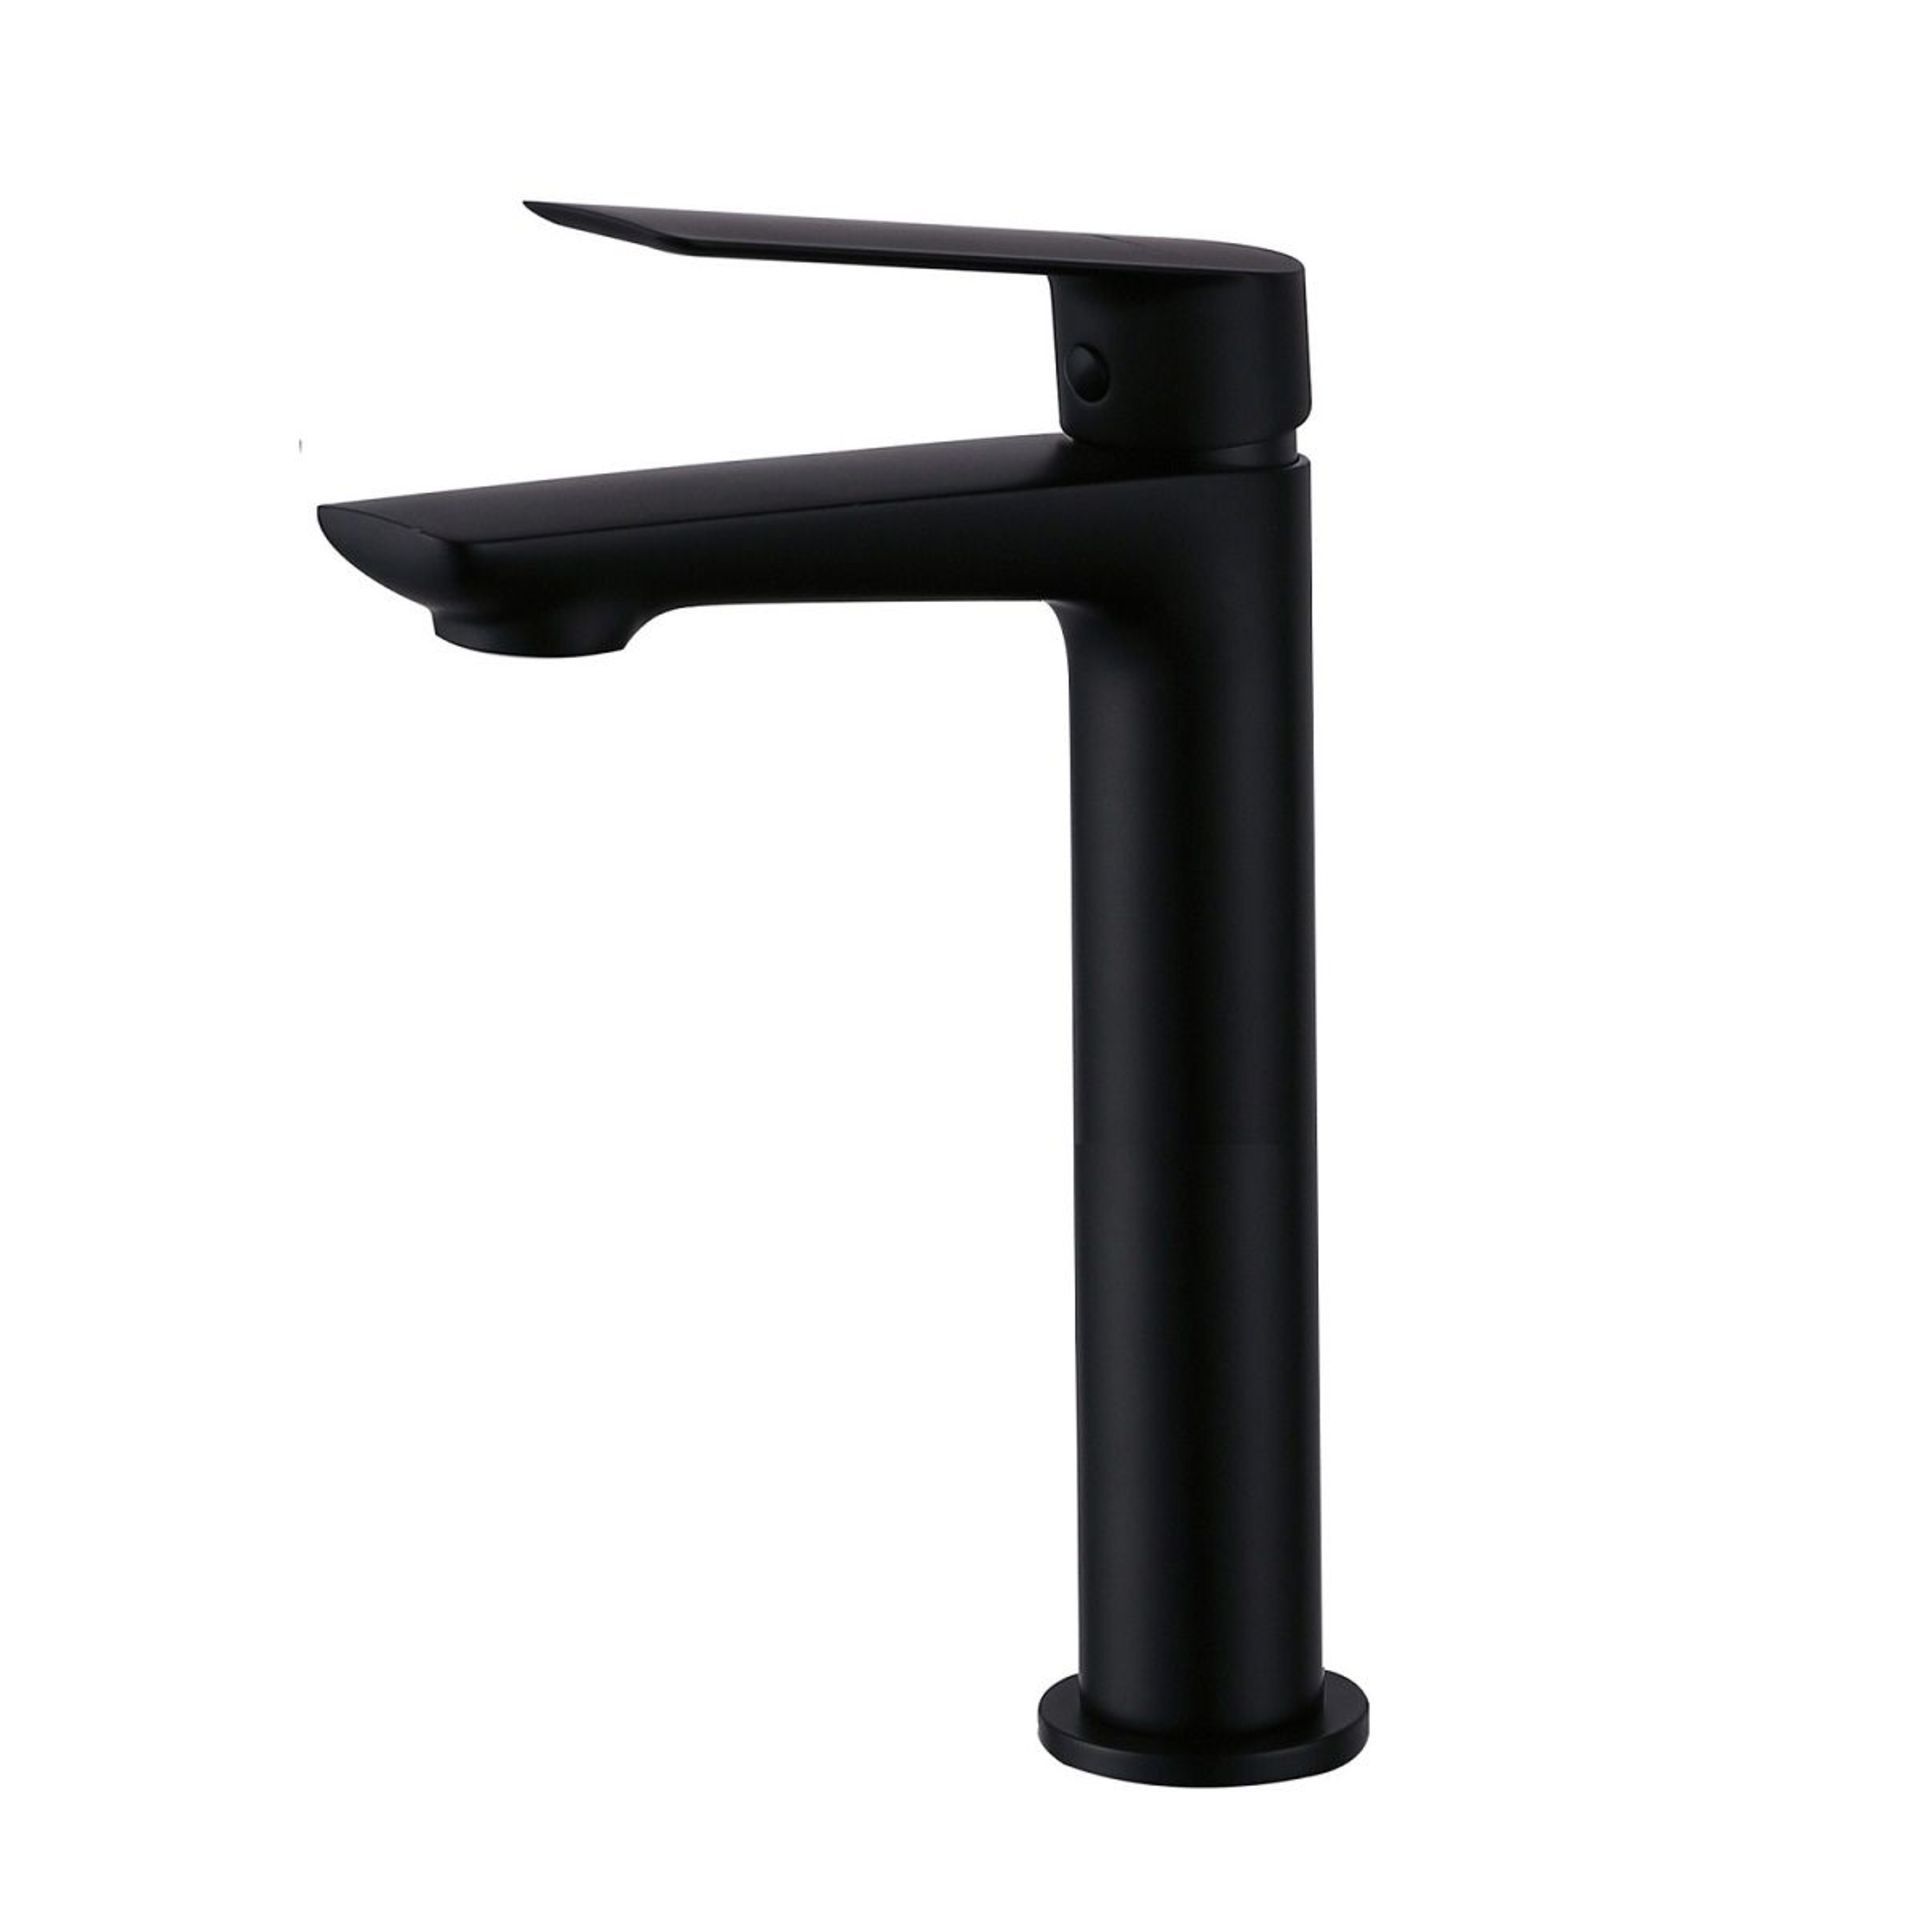 New & Boxed Finissimo Black Tall Mono Basin Mixer Tap. Tb7004.Finished In Black Material. New &... - Image 2 of 2